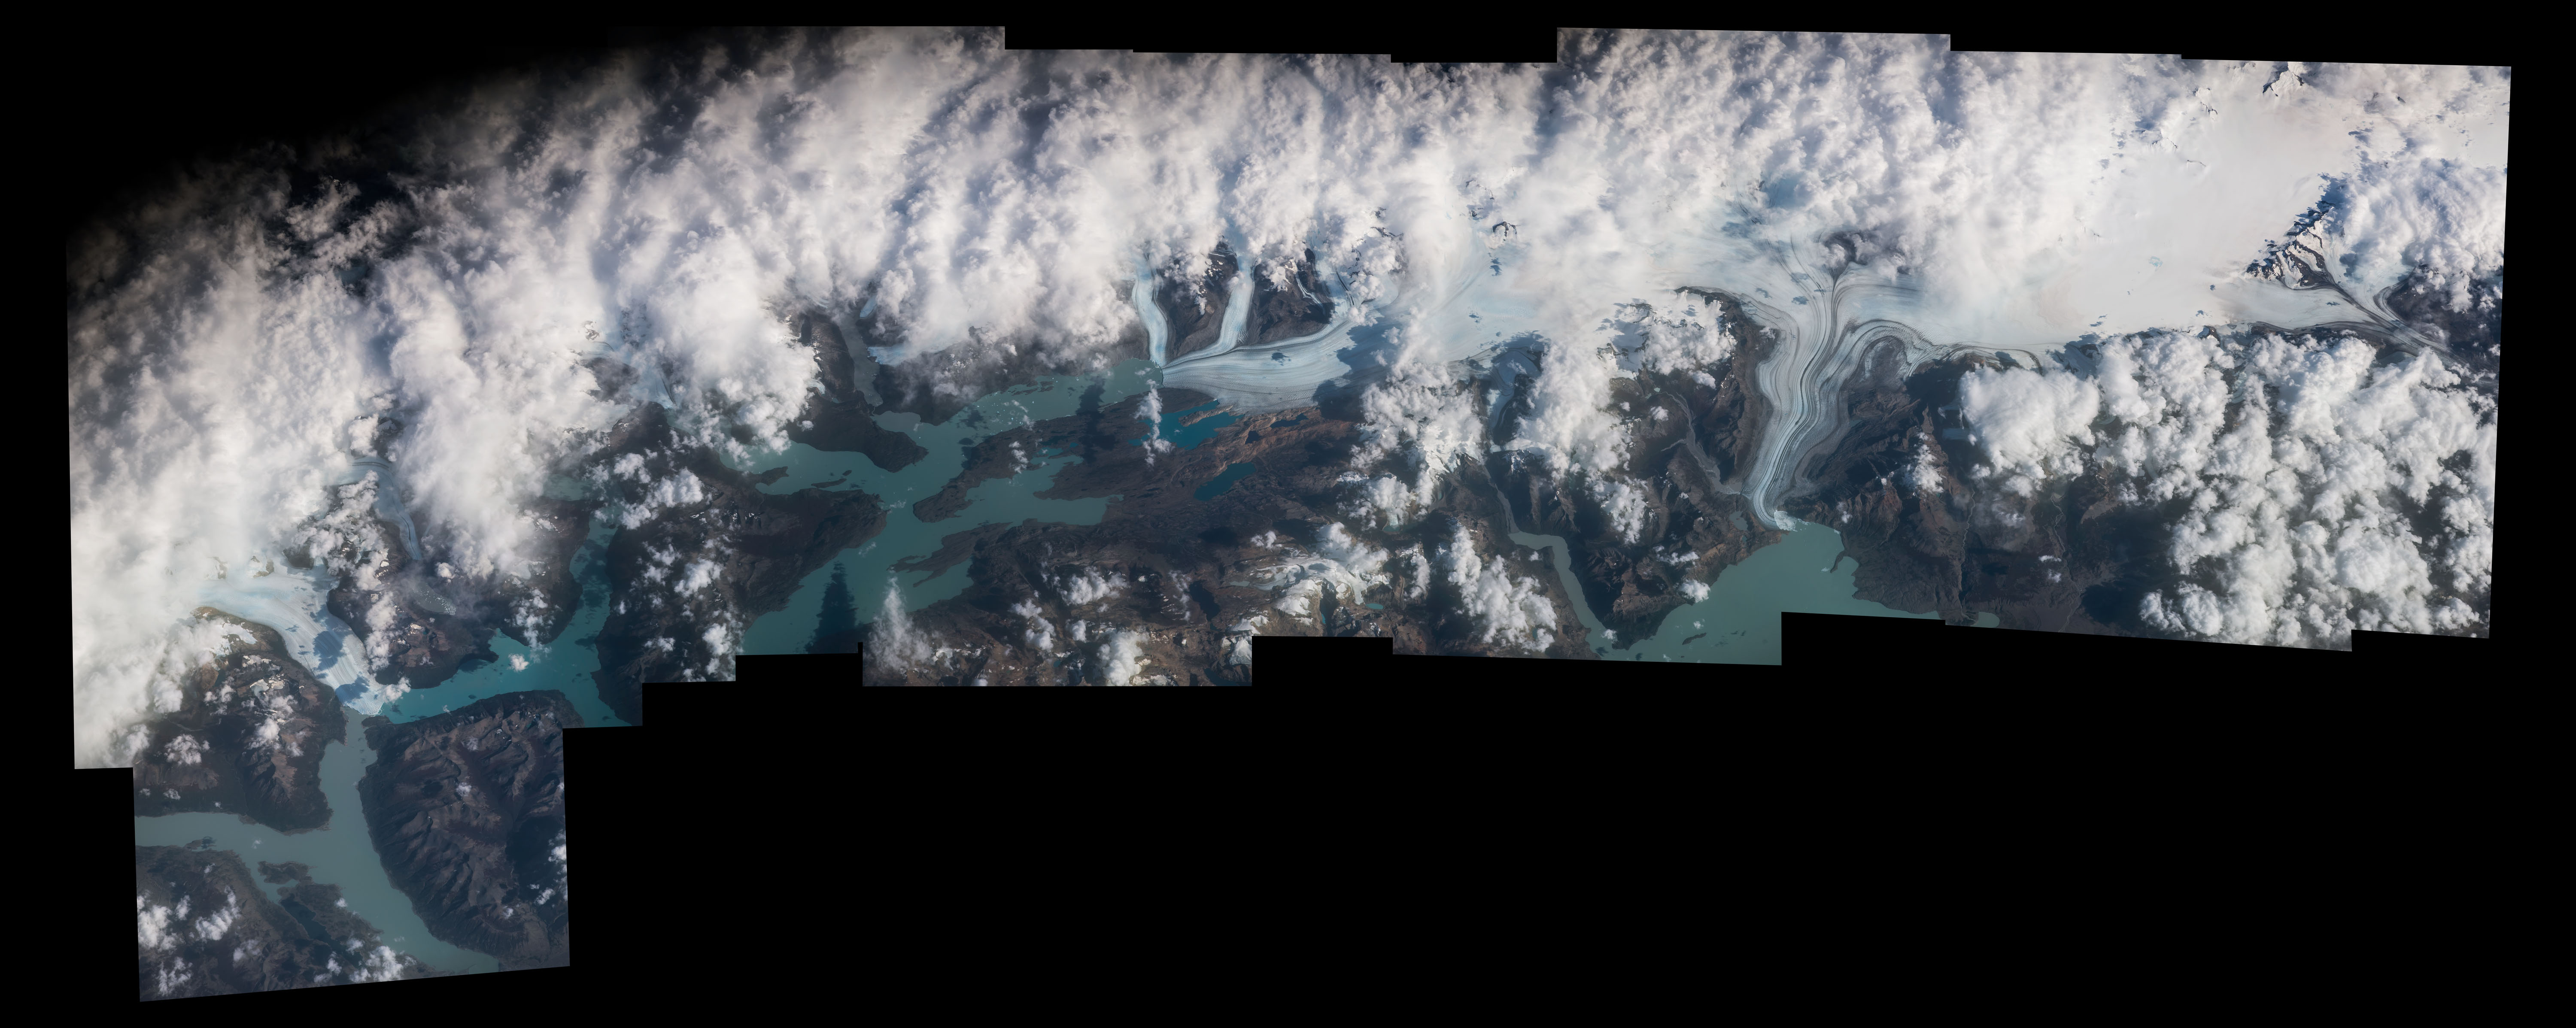 Southern Patagonian Ice Field